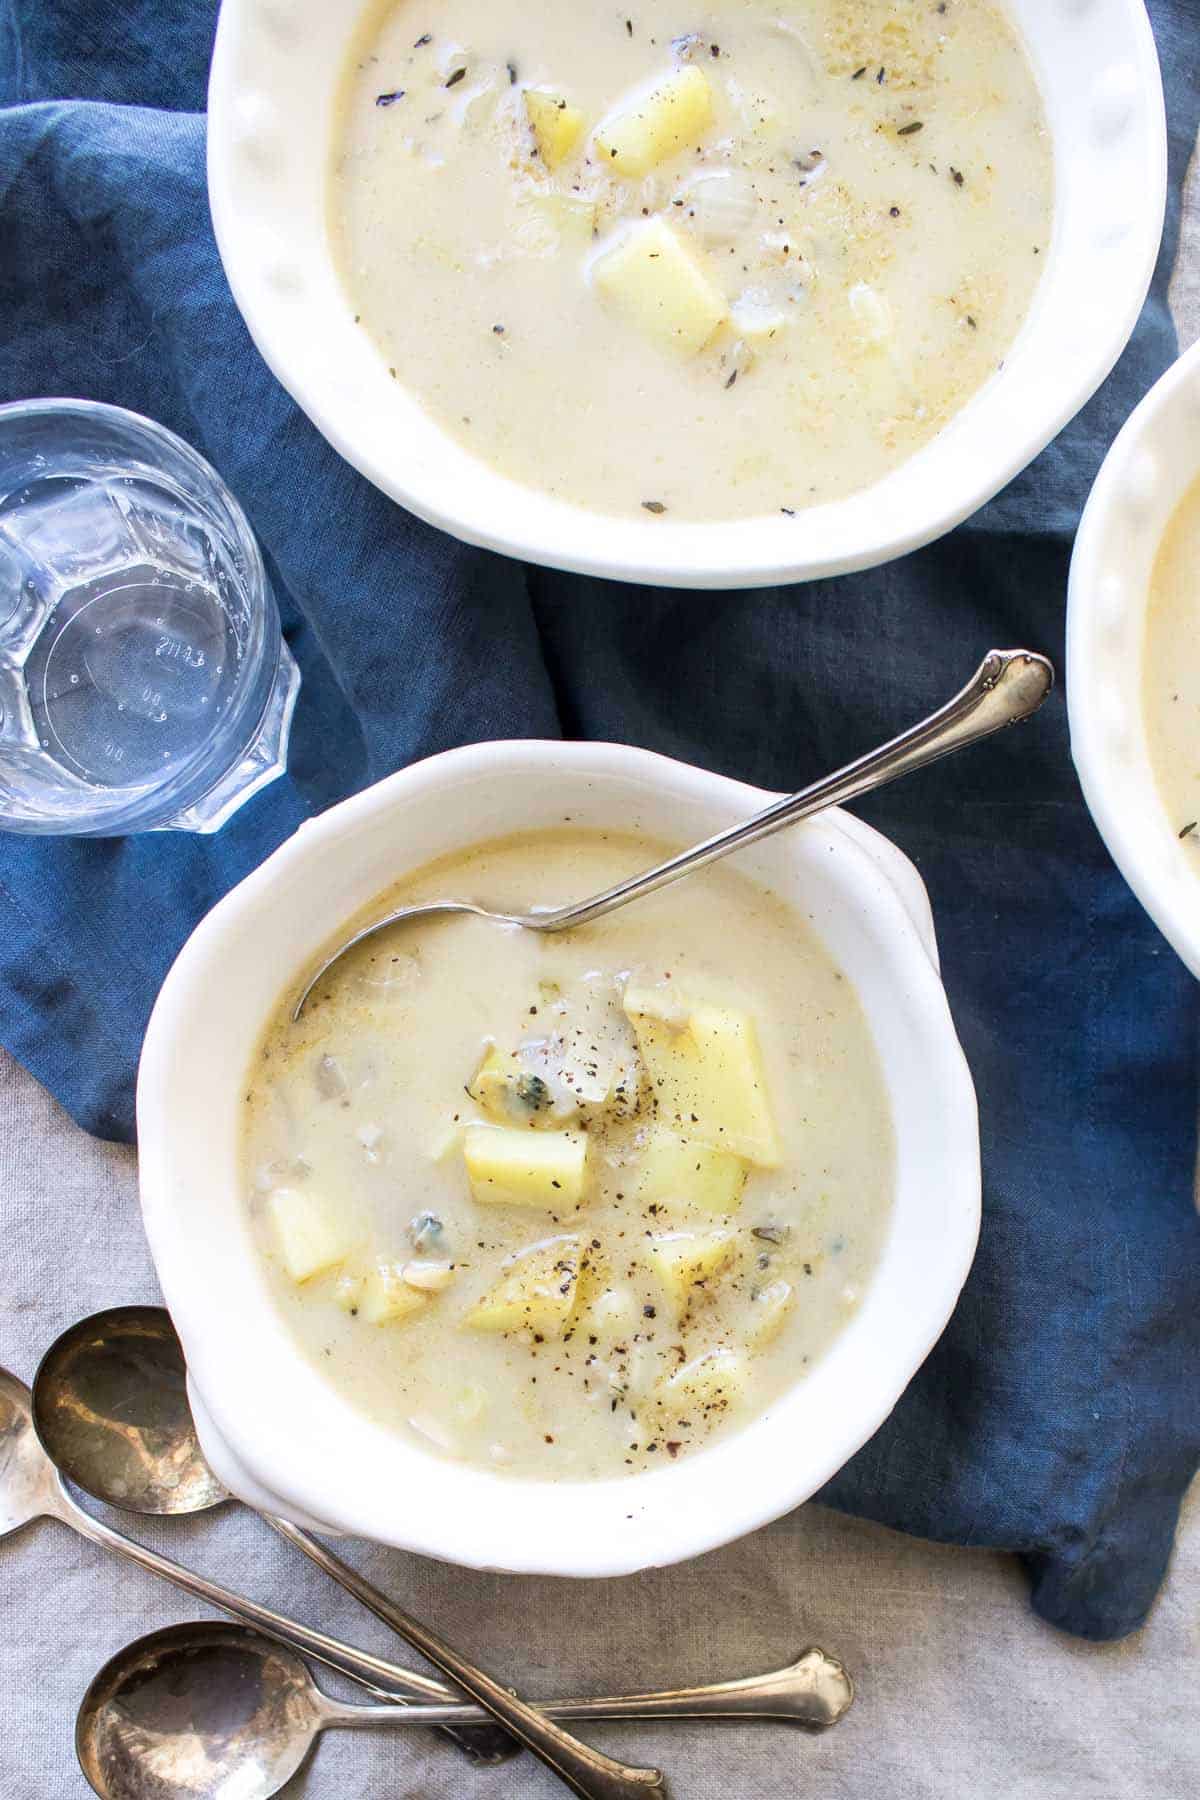 Delicious and dairy free Paleo Clam Chowder! Such a cozy recipe for fall